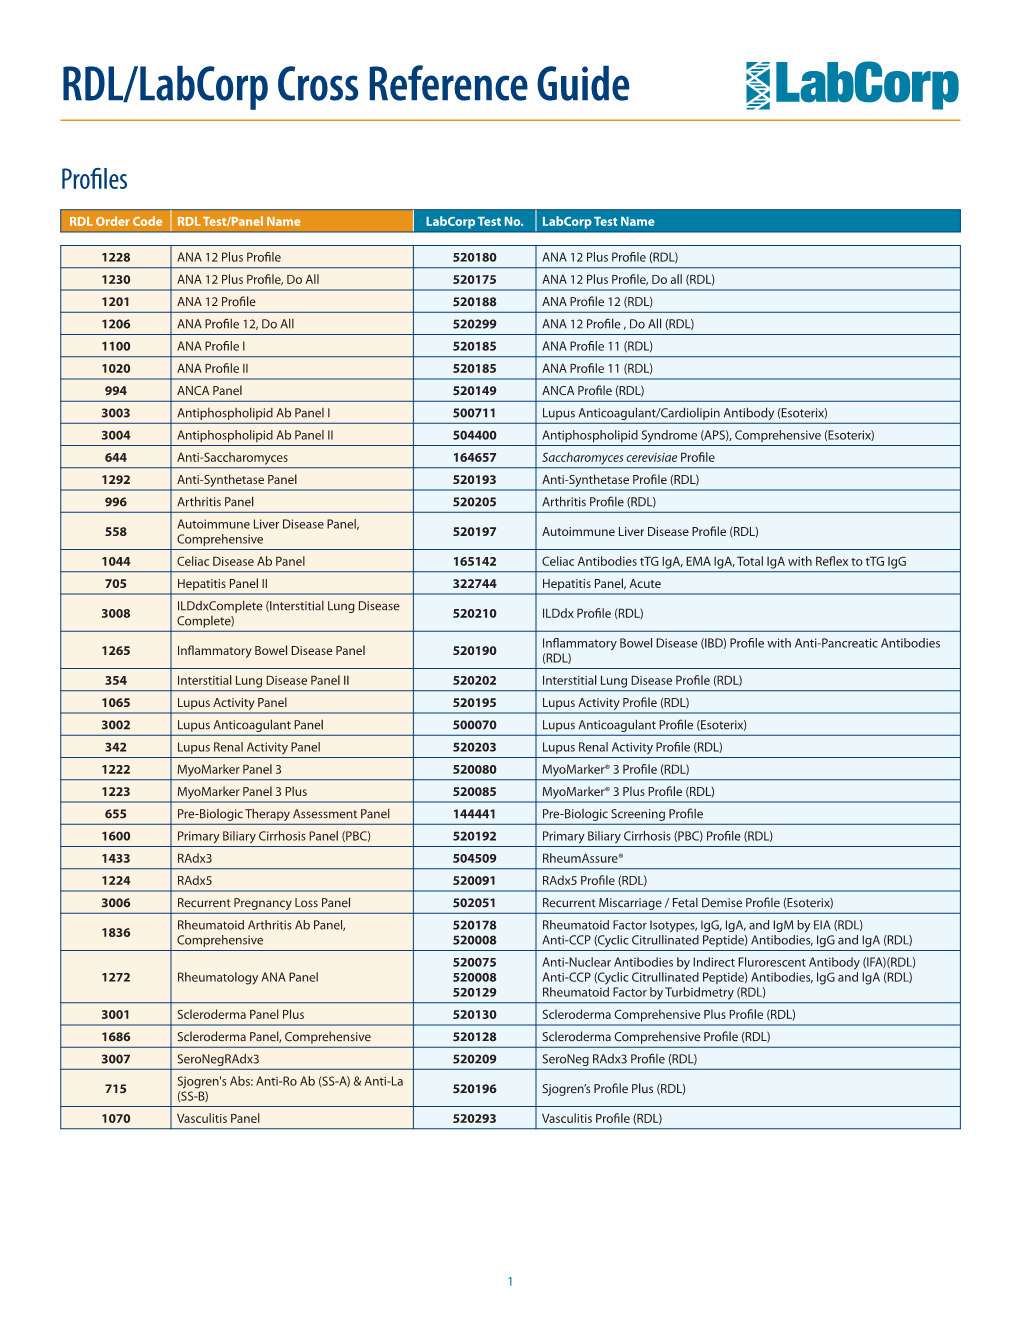 RDL/Labcorp Cross Reference Guide